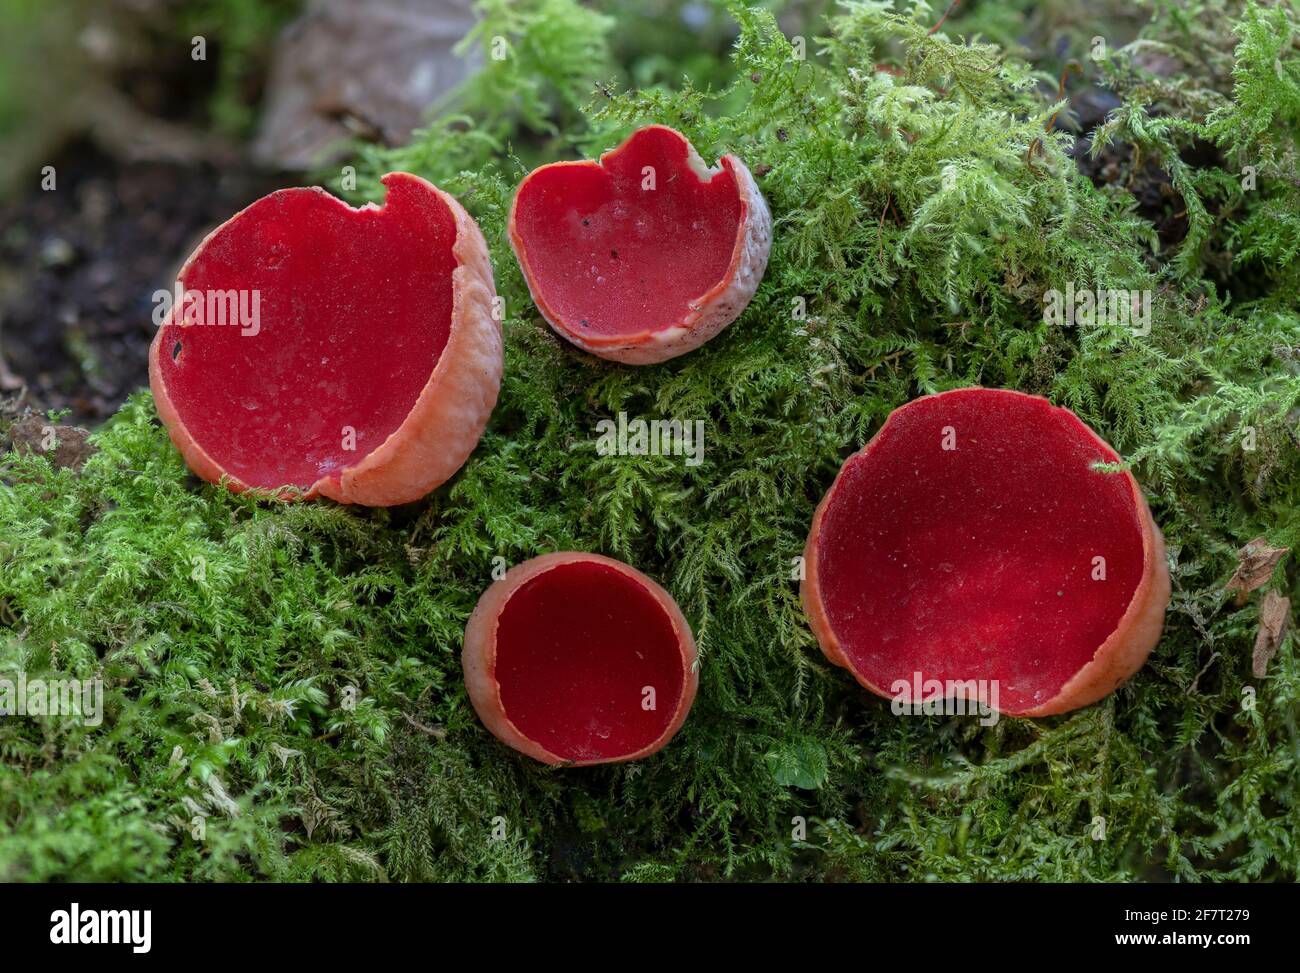 Scarlet elf cup, Sarcoscypha coccinea, ( Peziza coccinea ) growing abundantly in mossy woodland in winter. Stock Photo